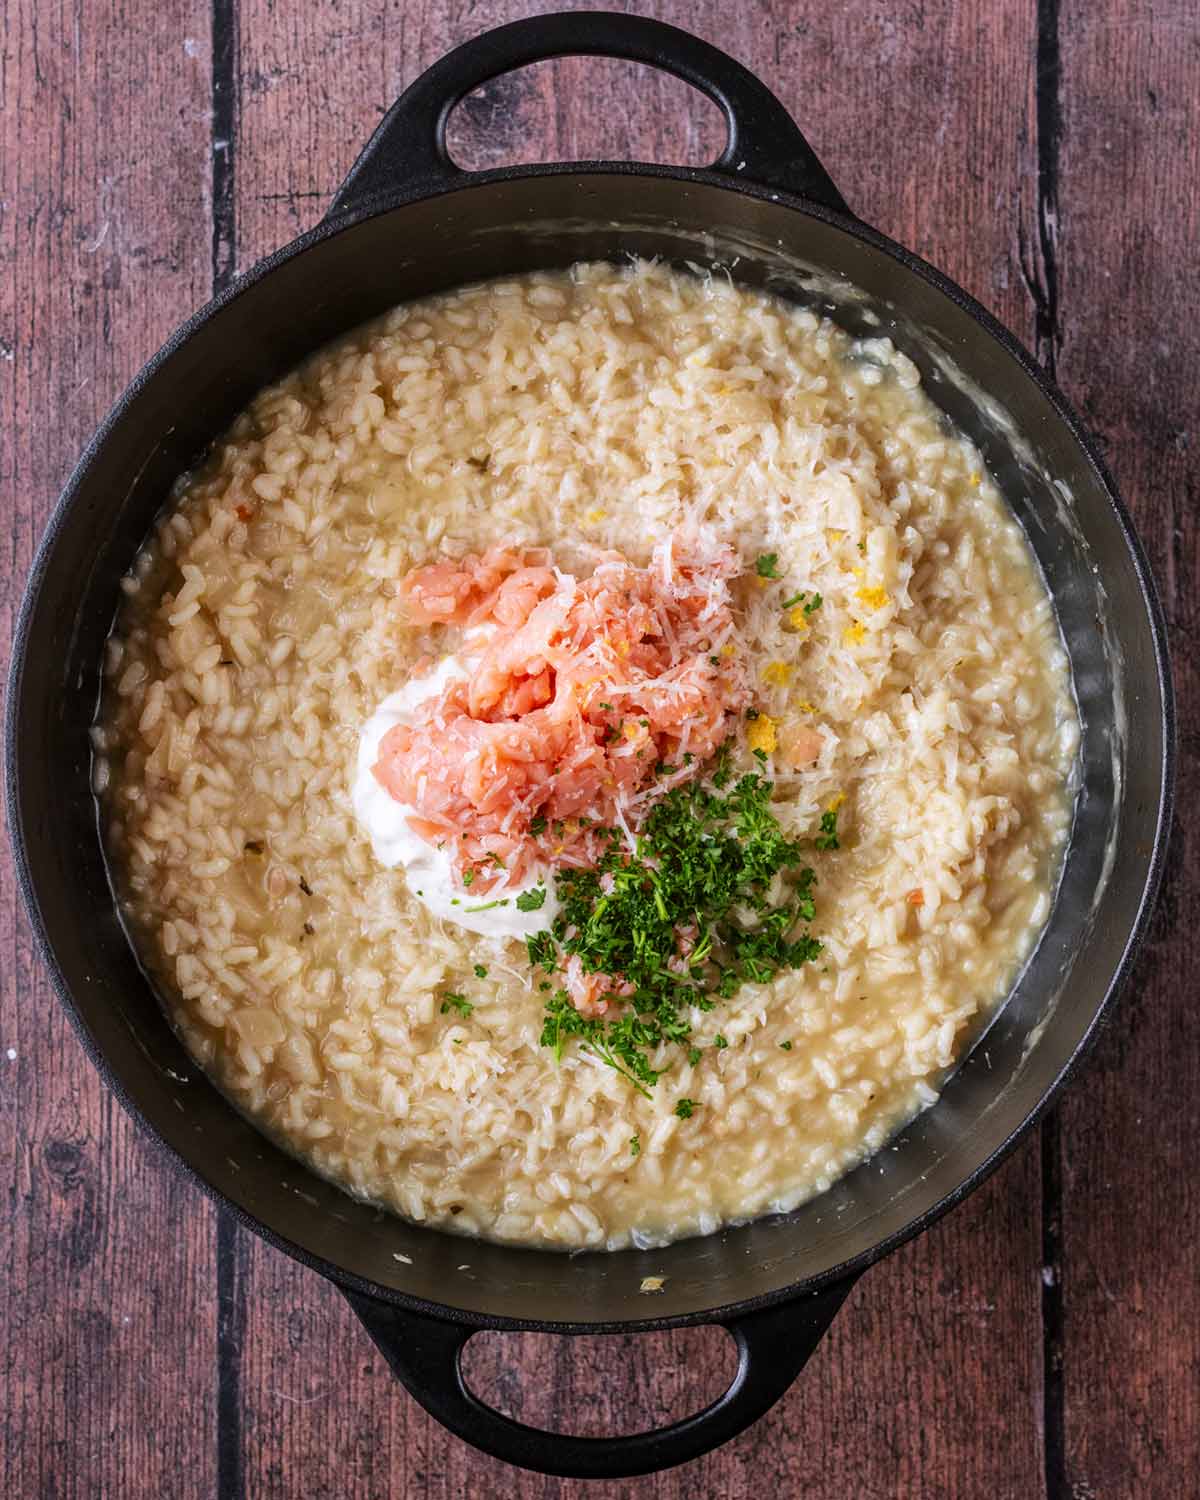 Cooked risotto with cream, salmon, cheese and herbs on top of it.